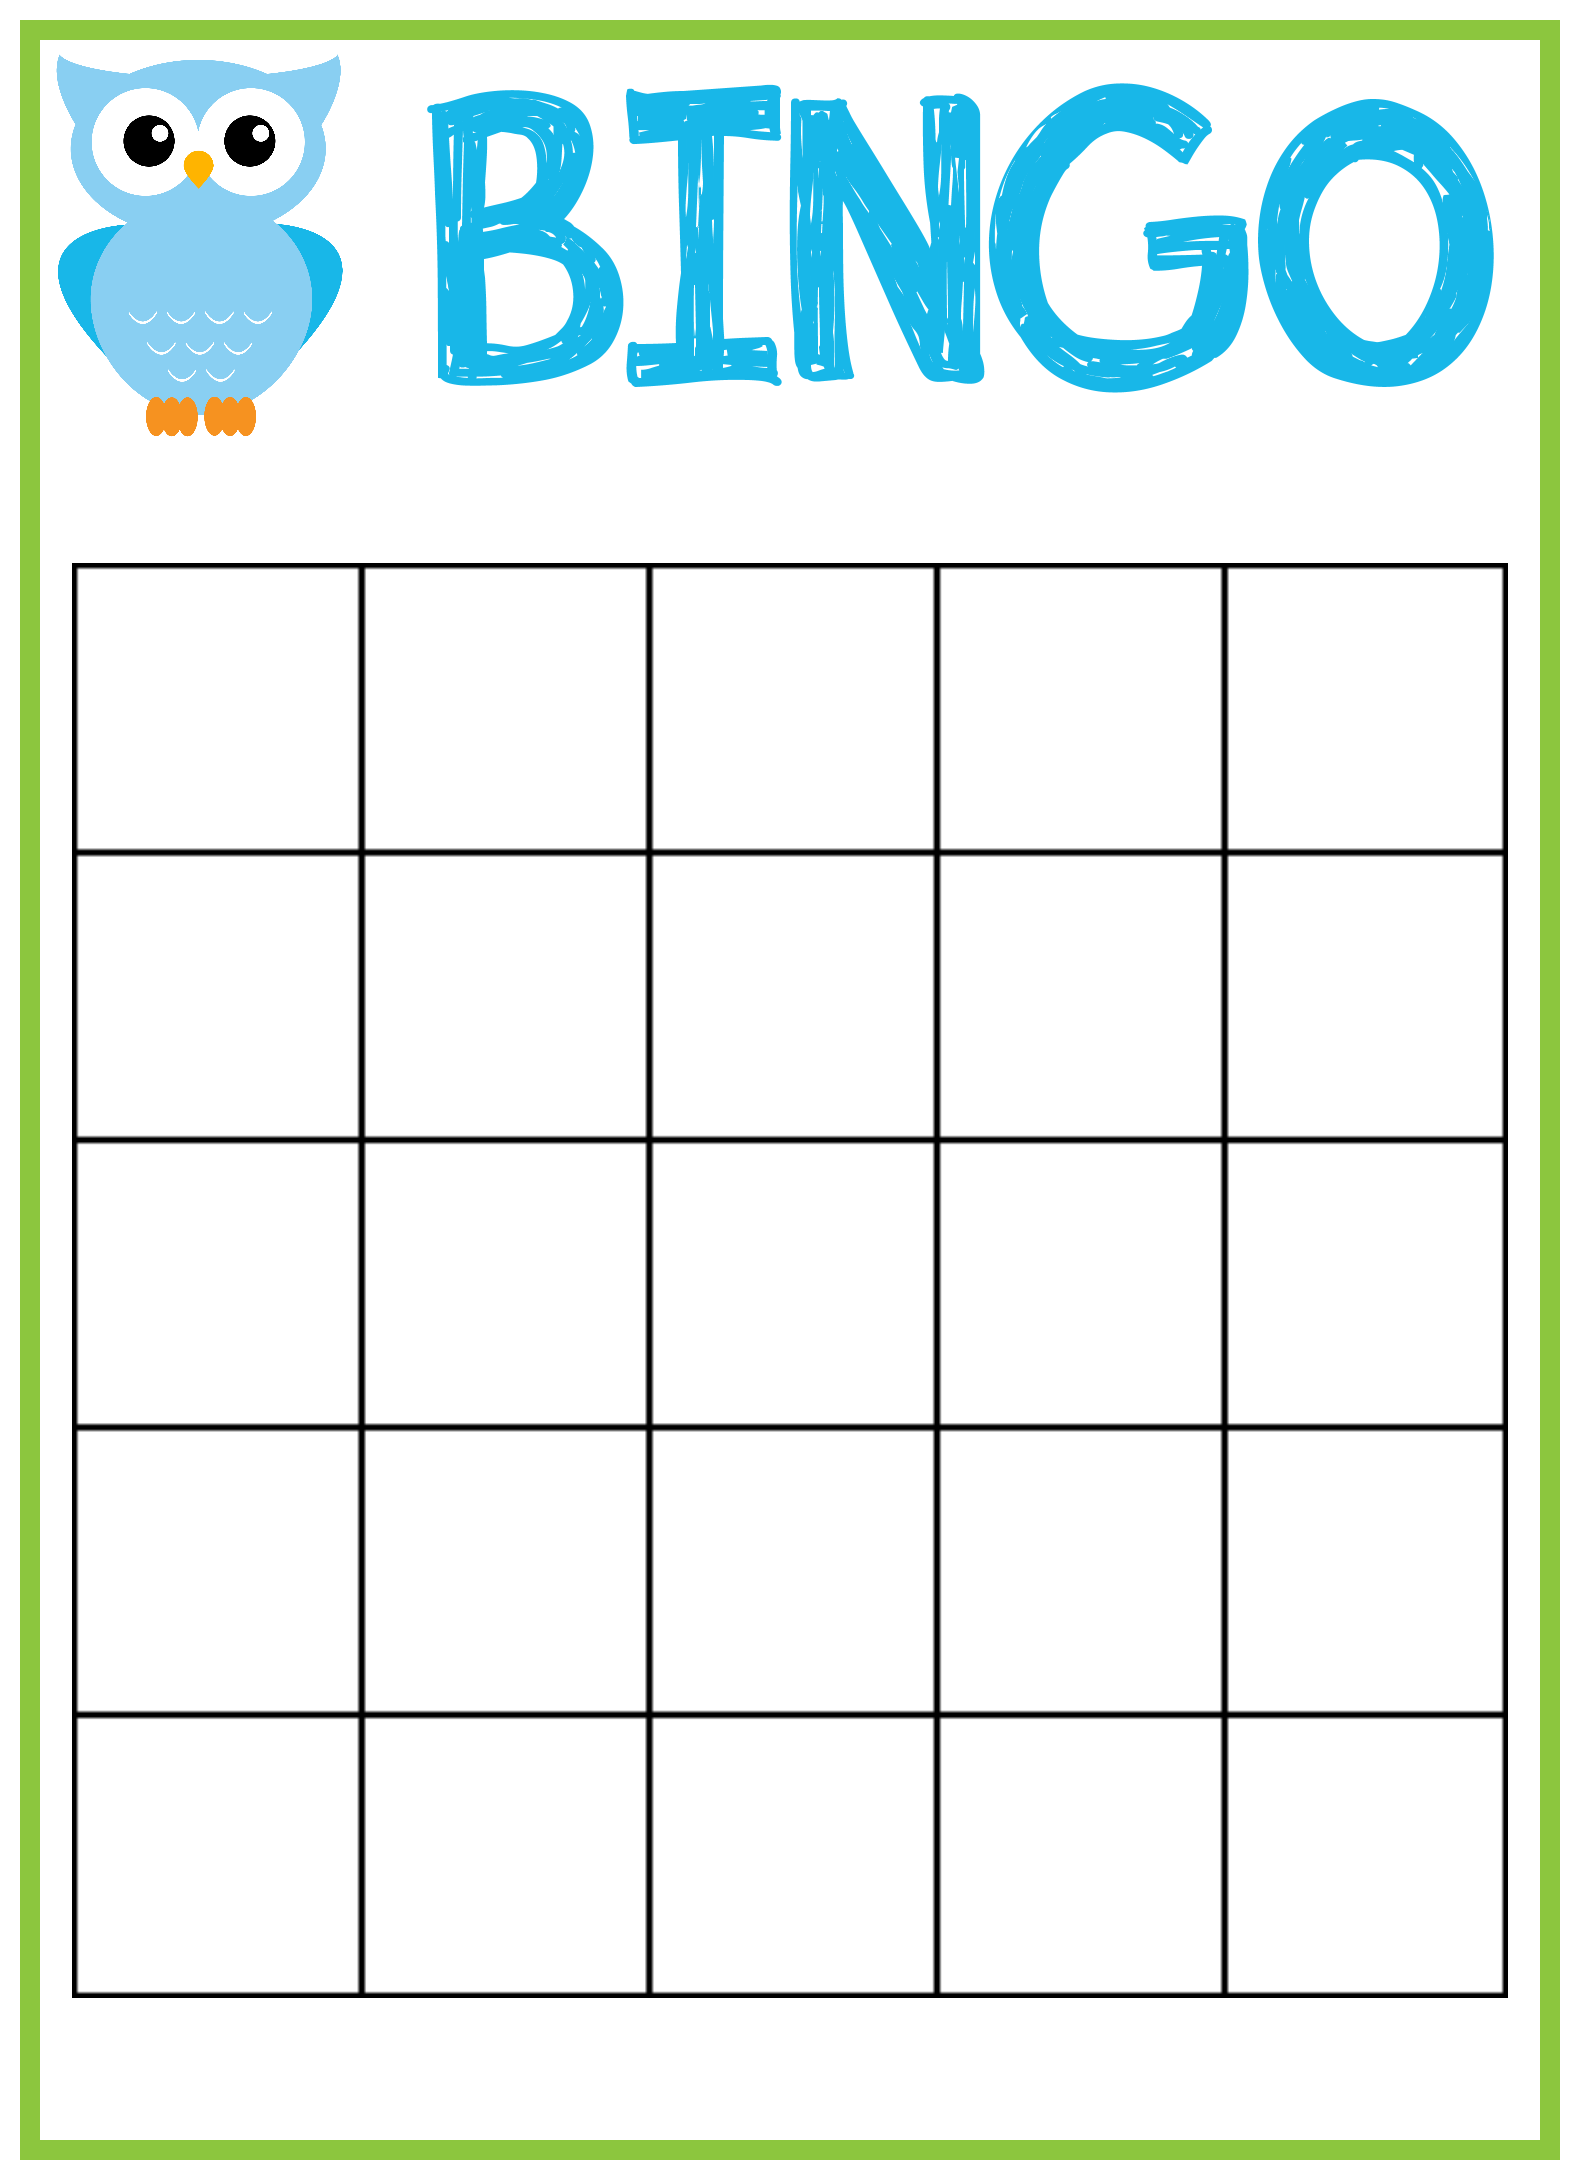 printable-bingo-cards-with-numbers